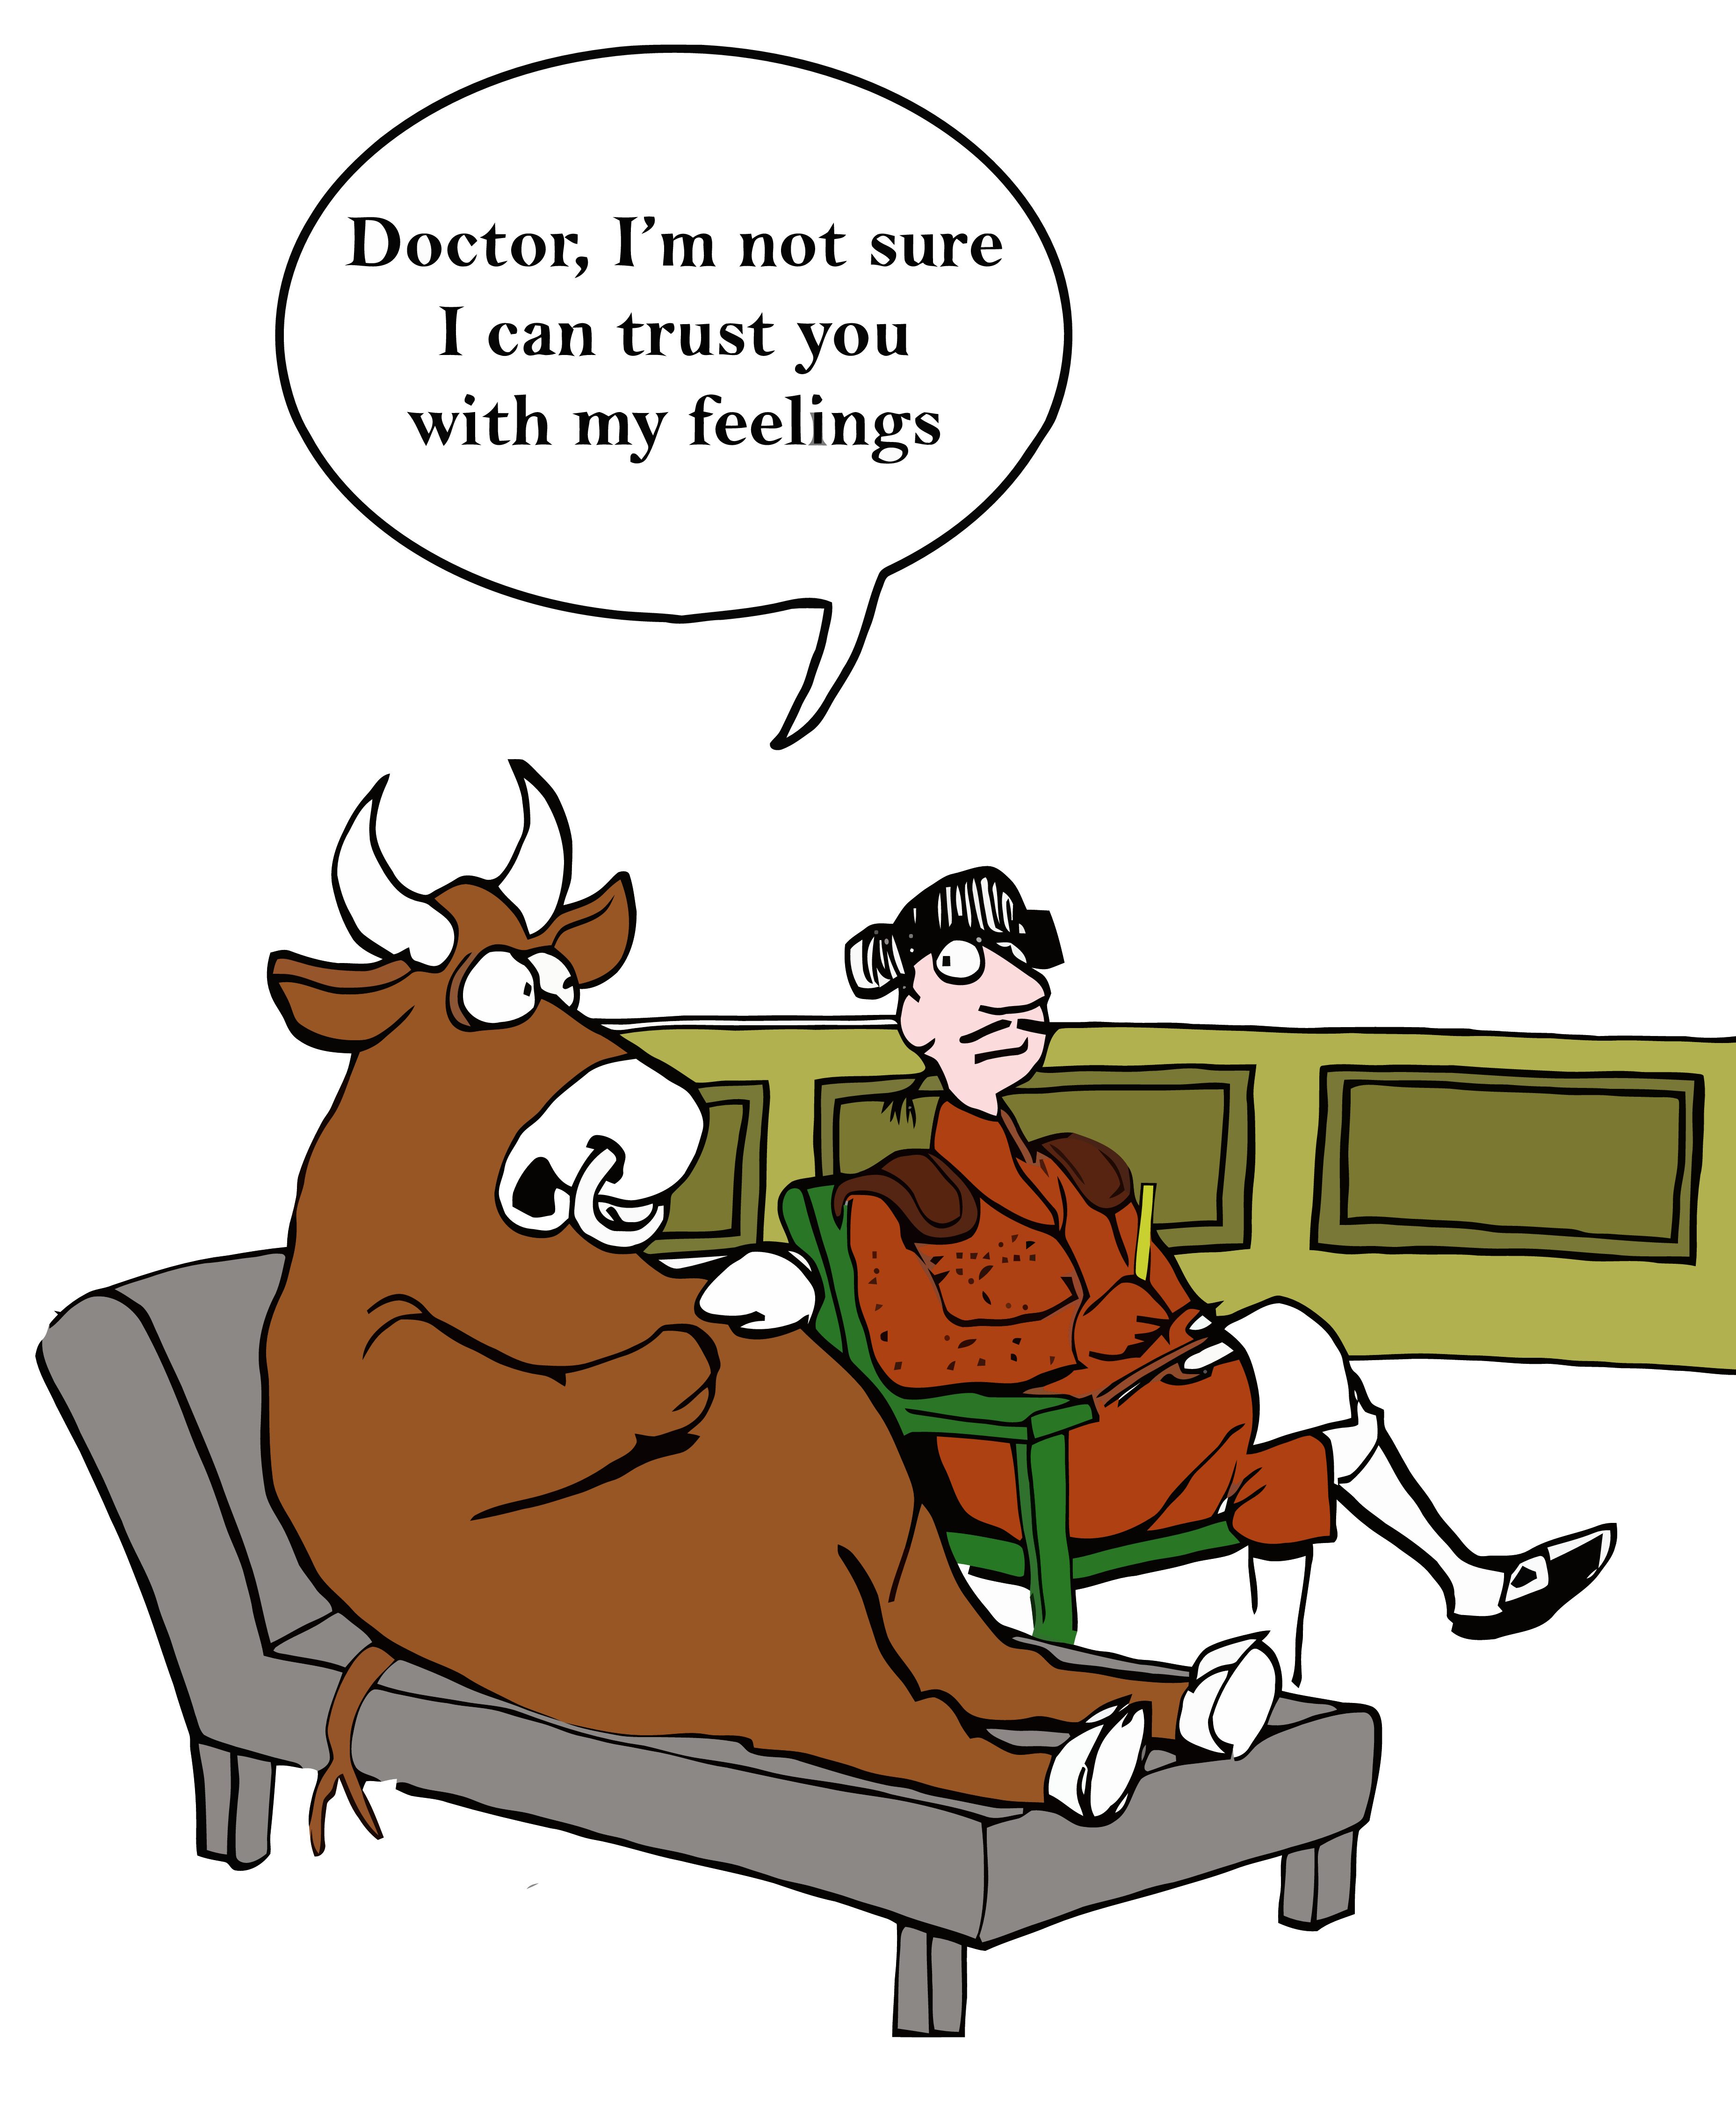 Doctor Cartoons That Will Make You Laugh Through the Pain | Reader's Digest